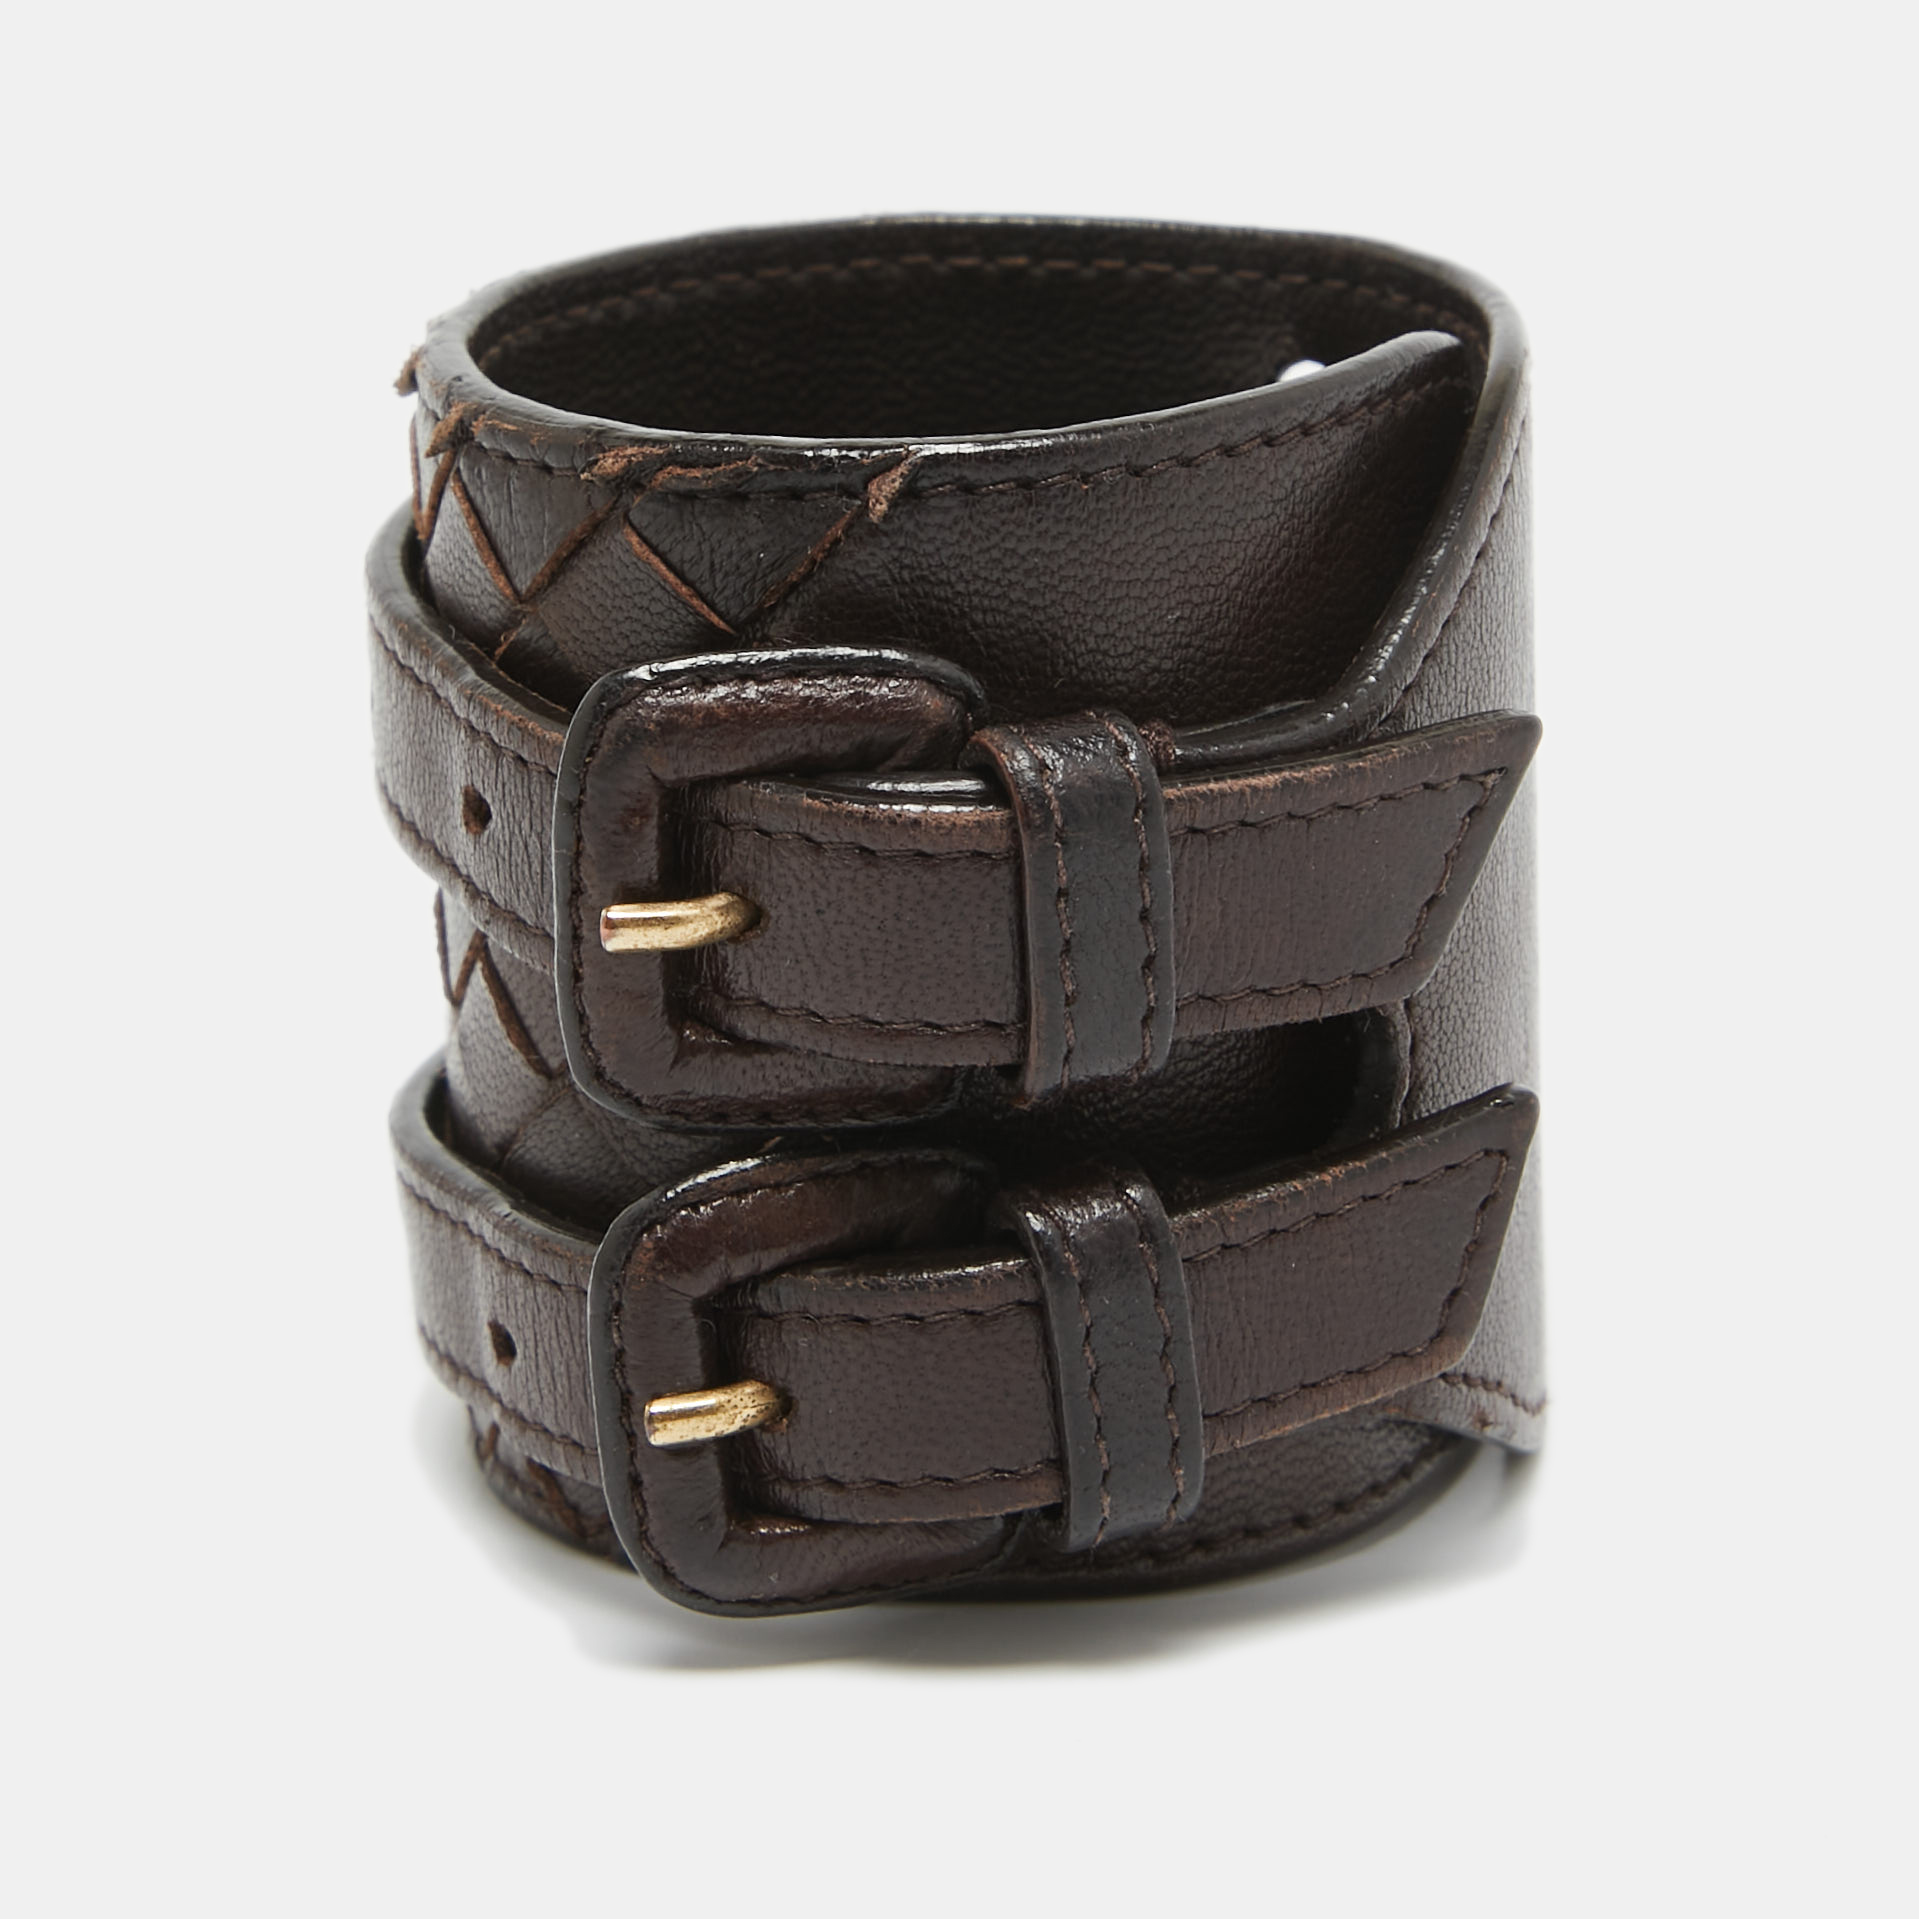 Designed in Intrecciato leather this wrap bracelet is a fine design from the house of Bottega Veneta. This bracelet has gold tone accents for a luxe contrast.